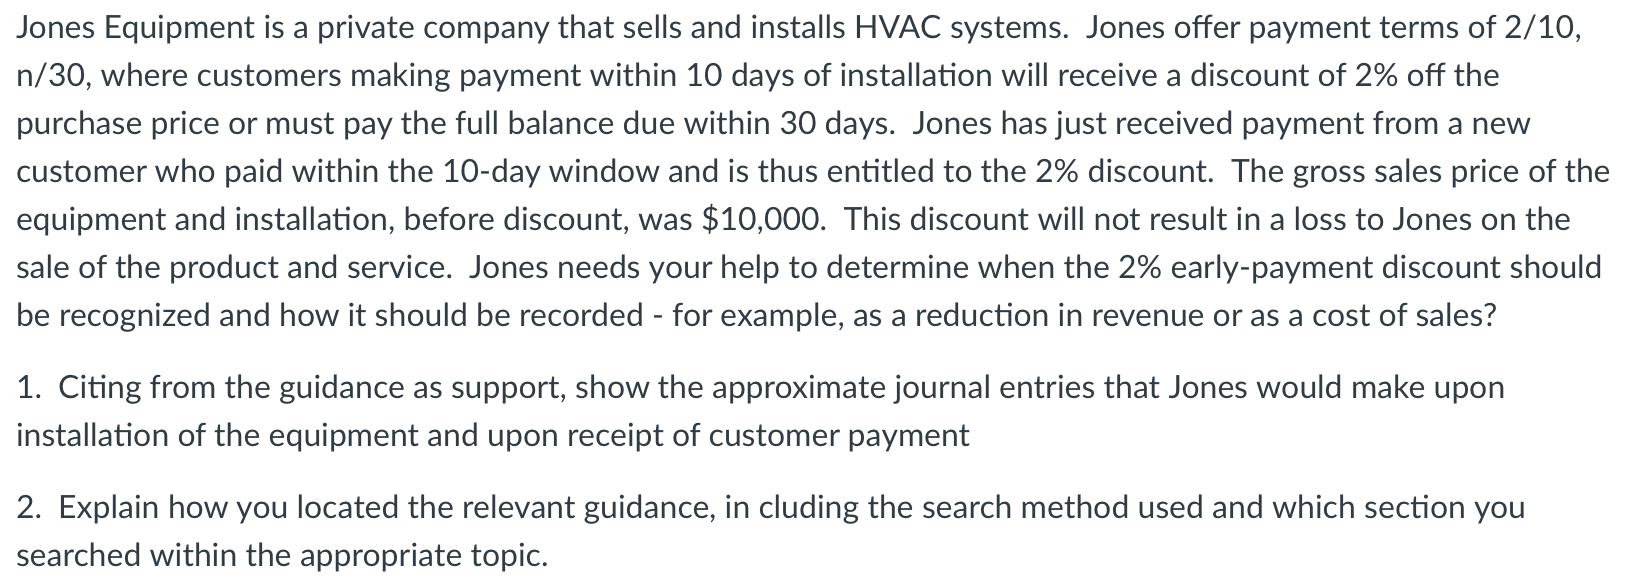 Jones Equipment is a private company that sells and installs HVAC systems. Jones offer payment terms of 2/10, n/30, where cus